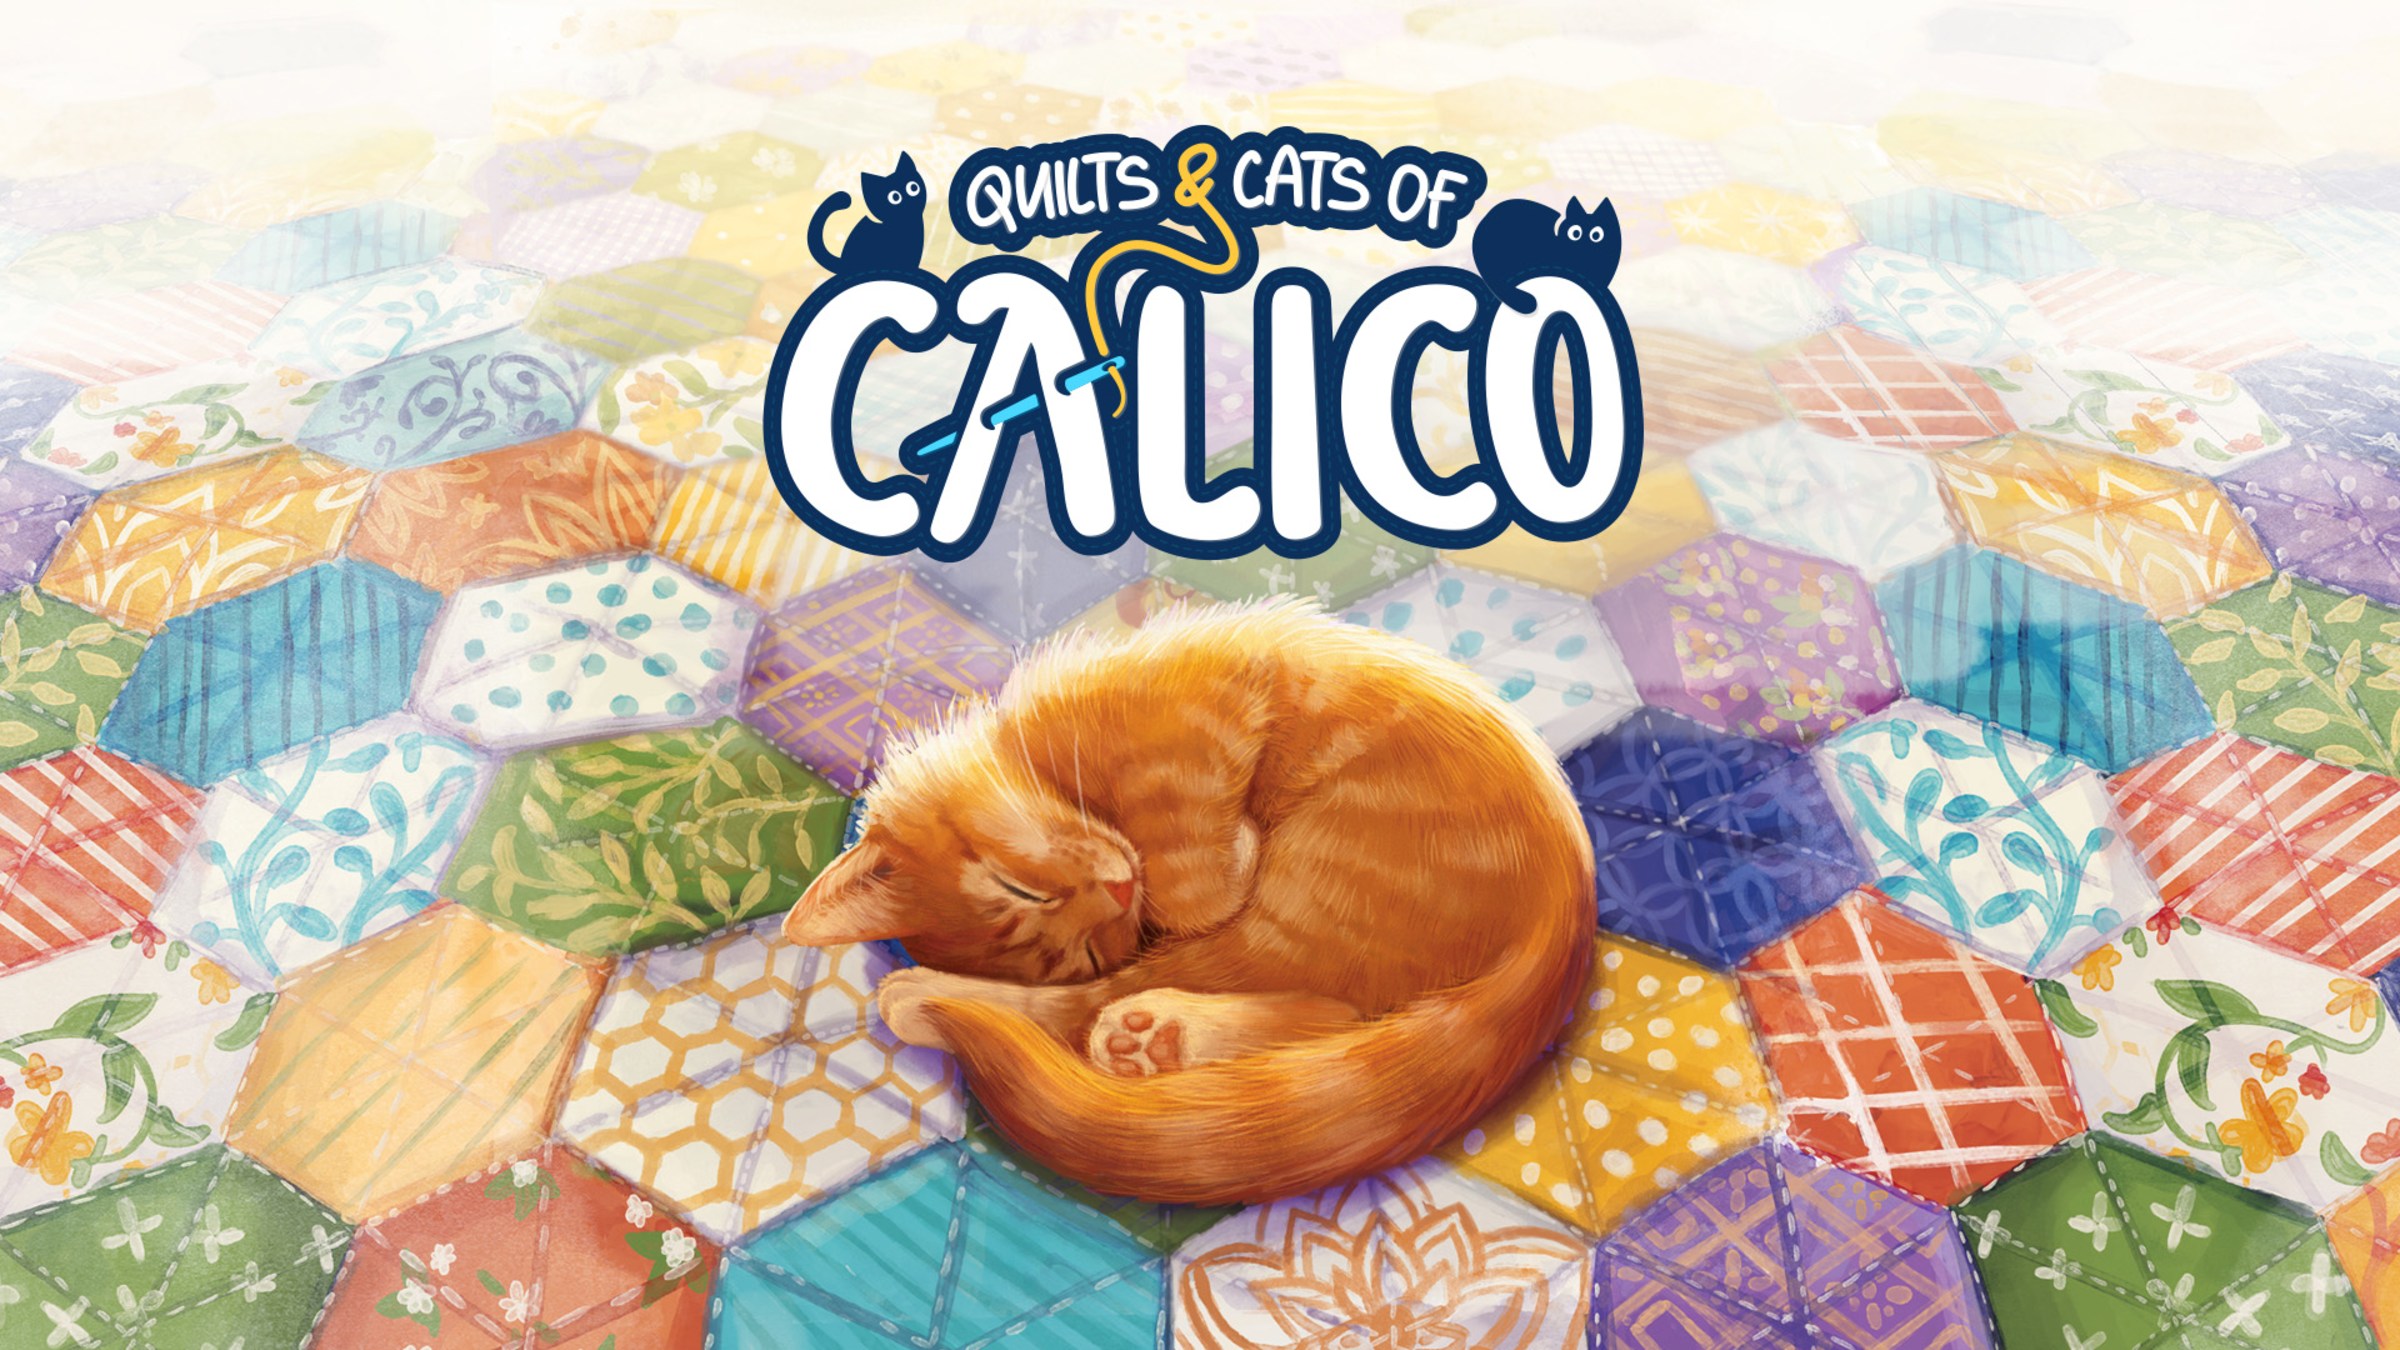 Quilts and Cats of Calico Full Version Free Download Version Full Game Setup Free Download